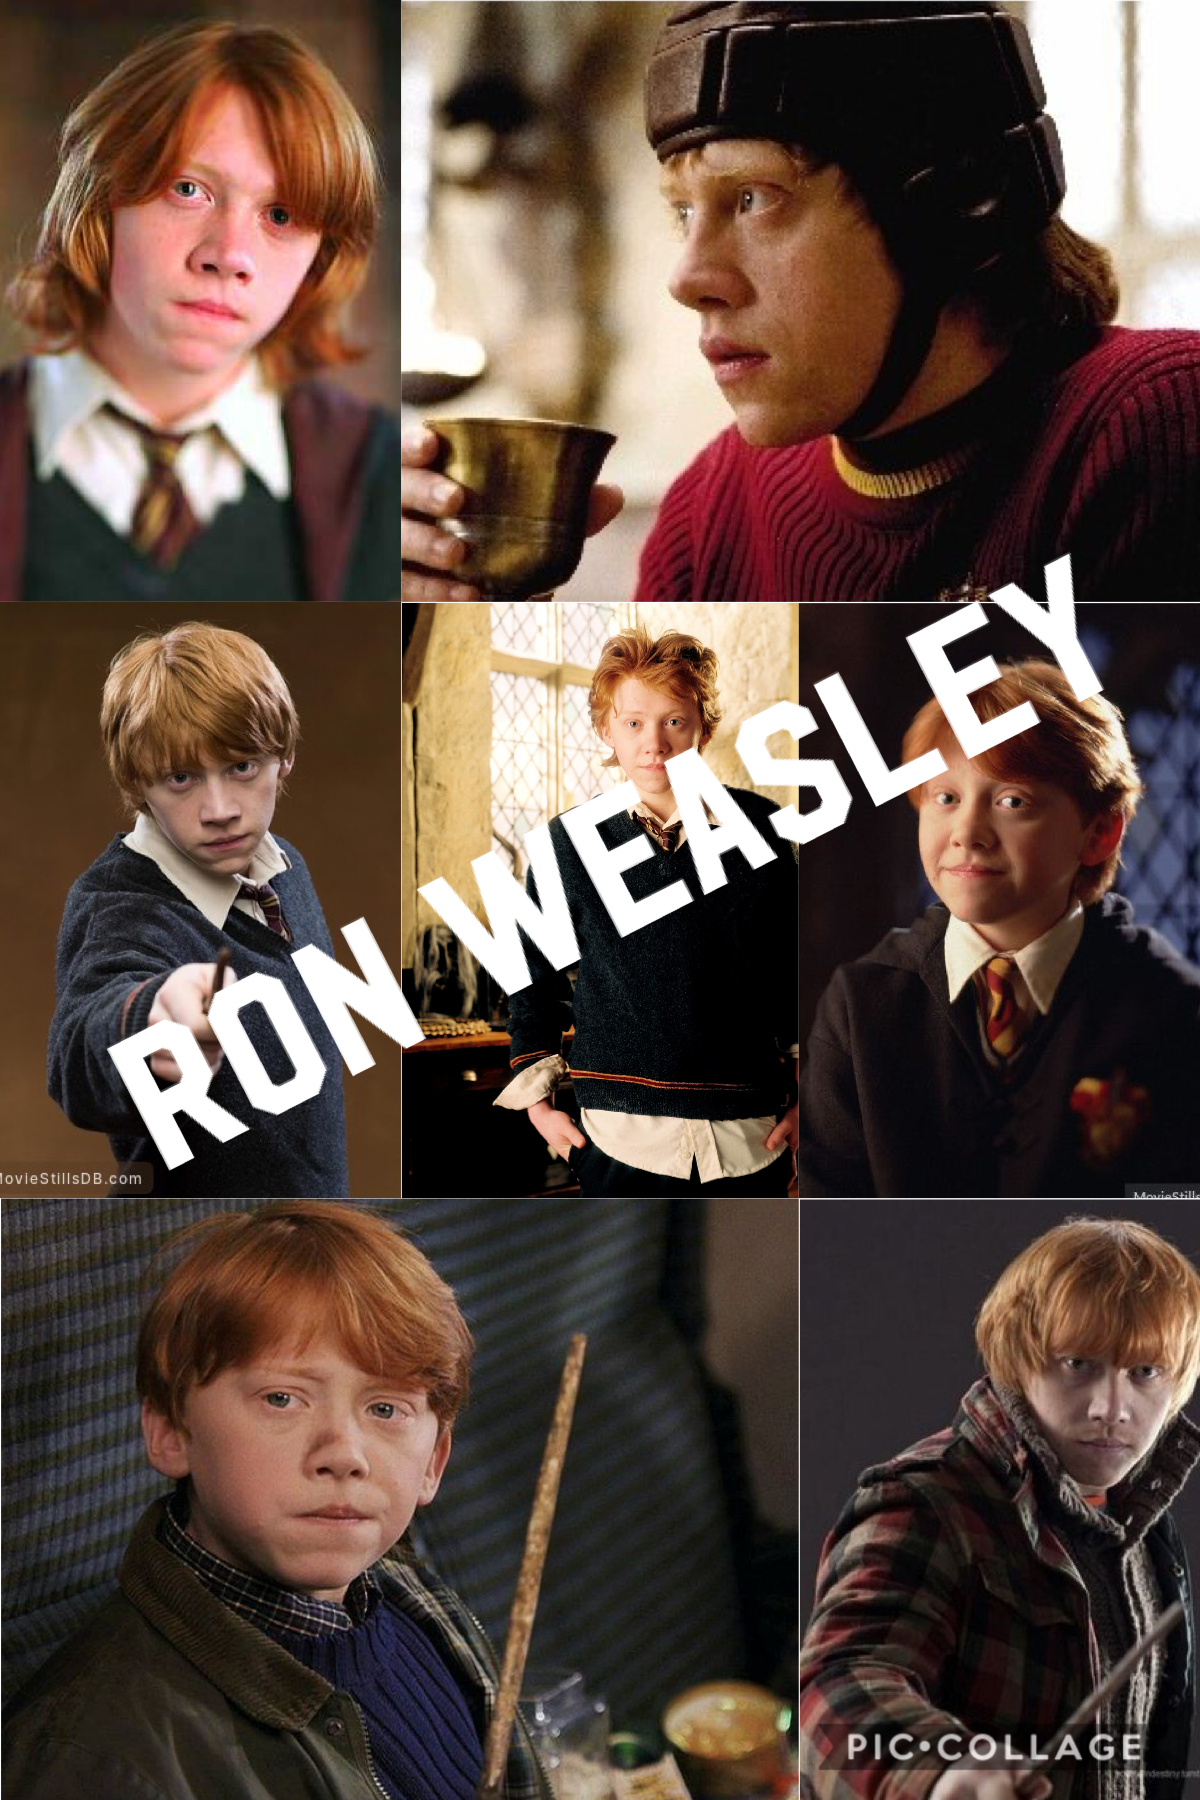 Ron through the years